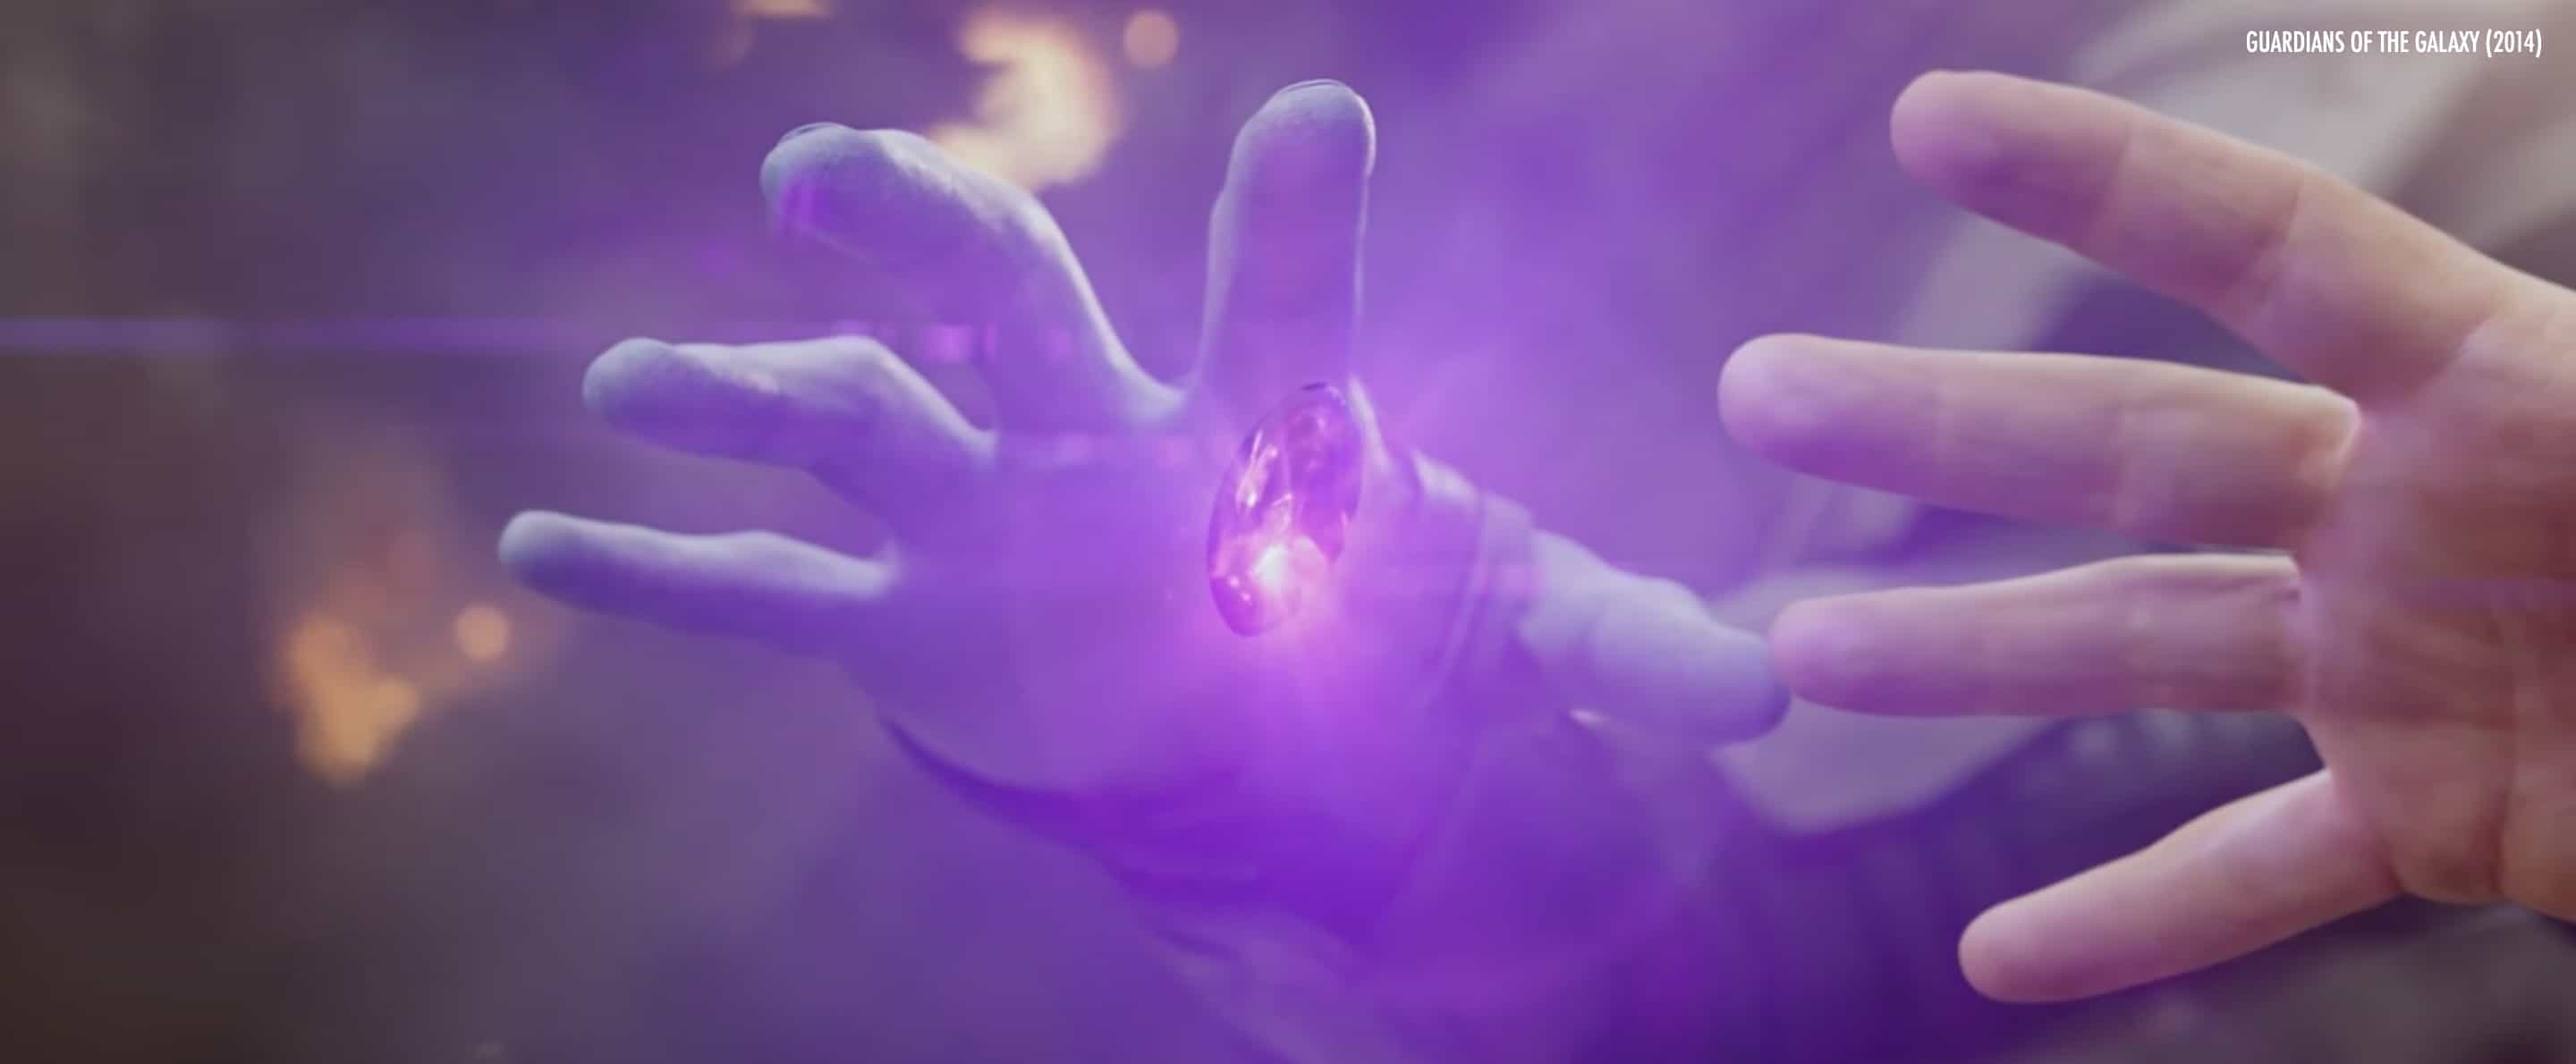 Guardians Of The Galaxy (2014) Power Stone